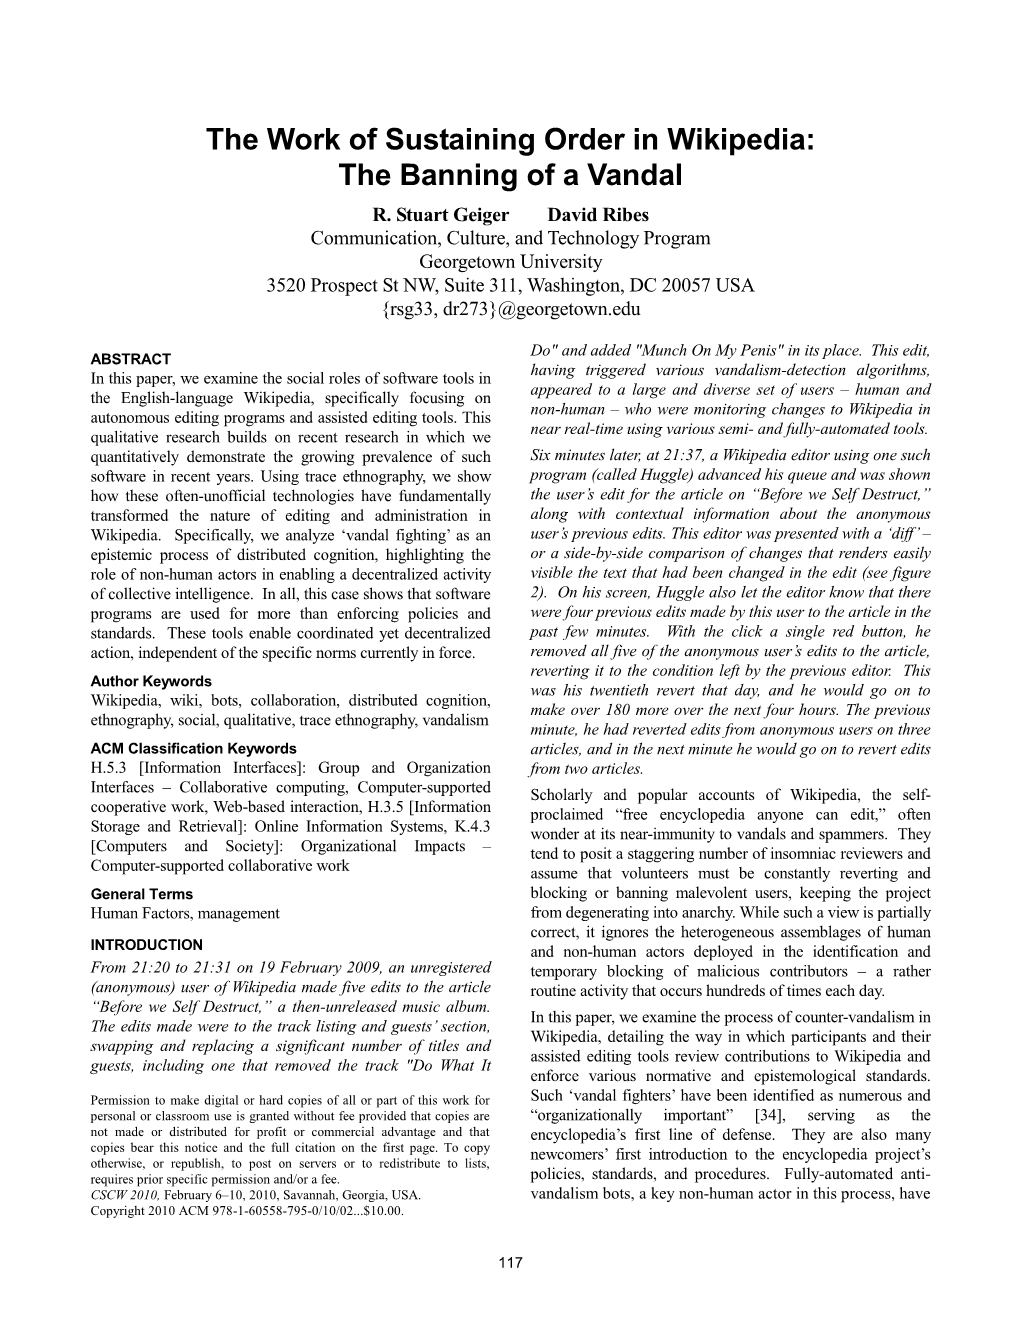 The Work of Sustaining Order in Wikipedia: the Banning of a Vandal R